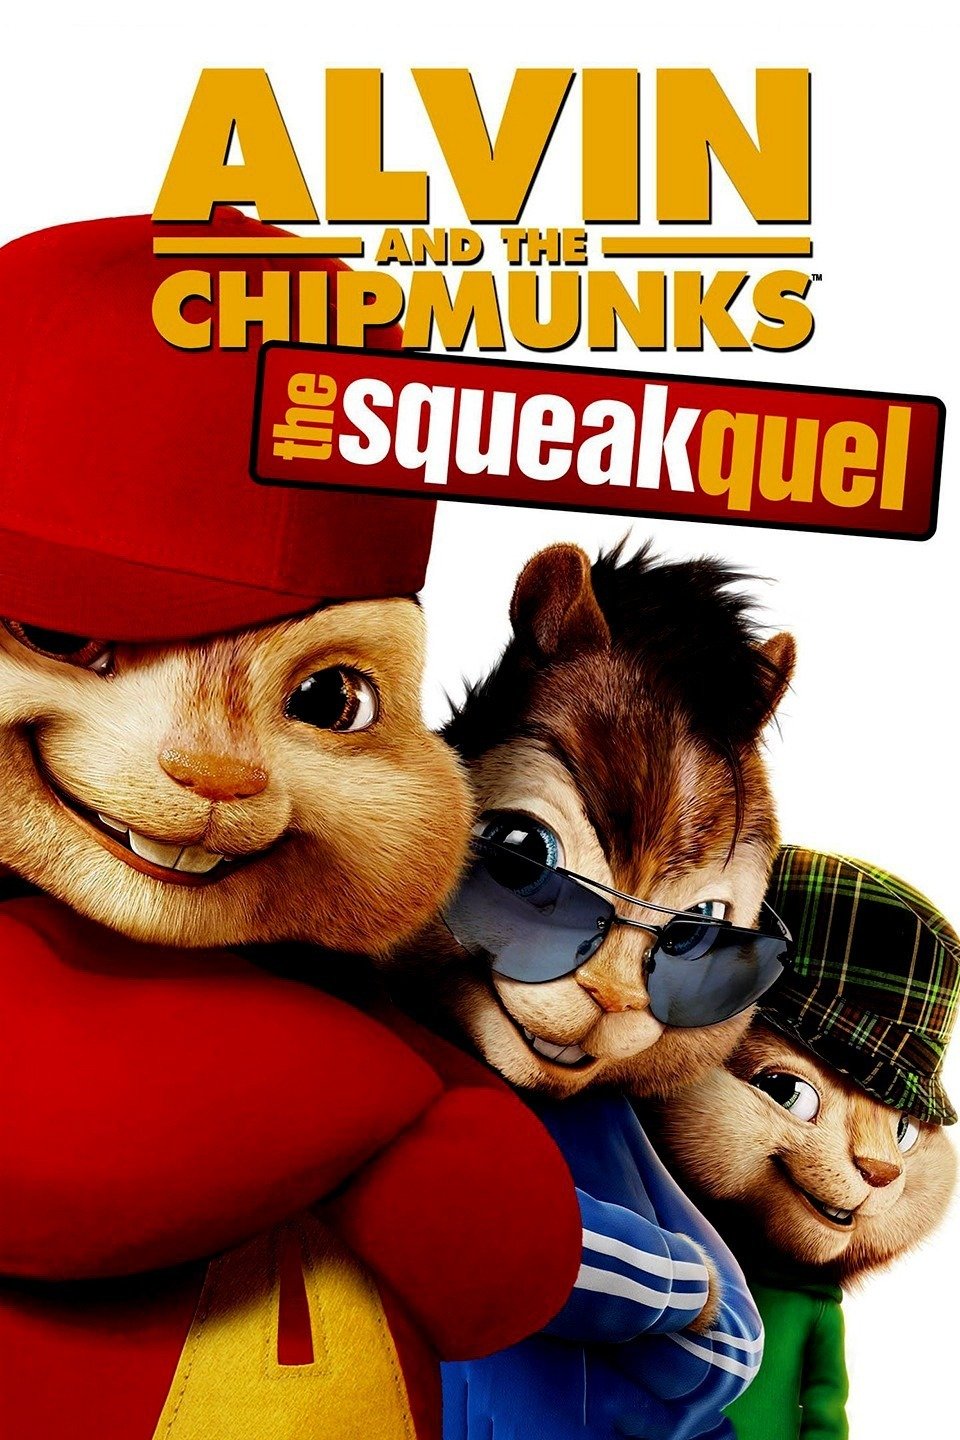 Alvin and the Chipmunks: The Squeakquel - Rotten Tomatoes